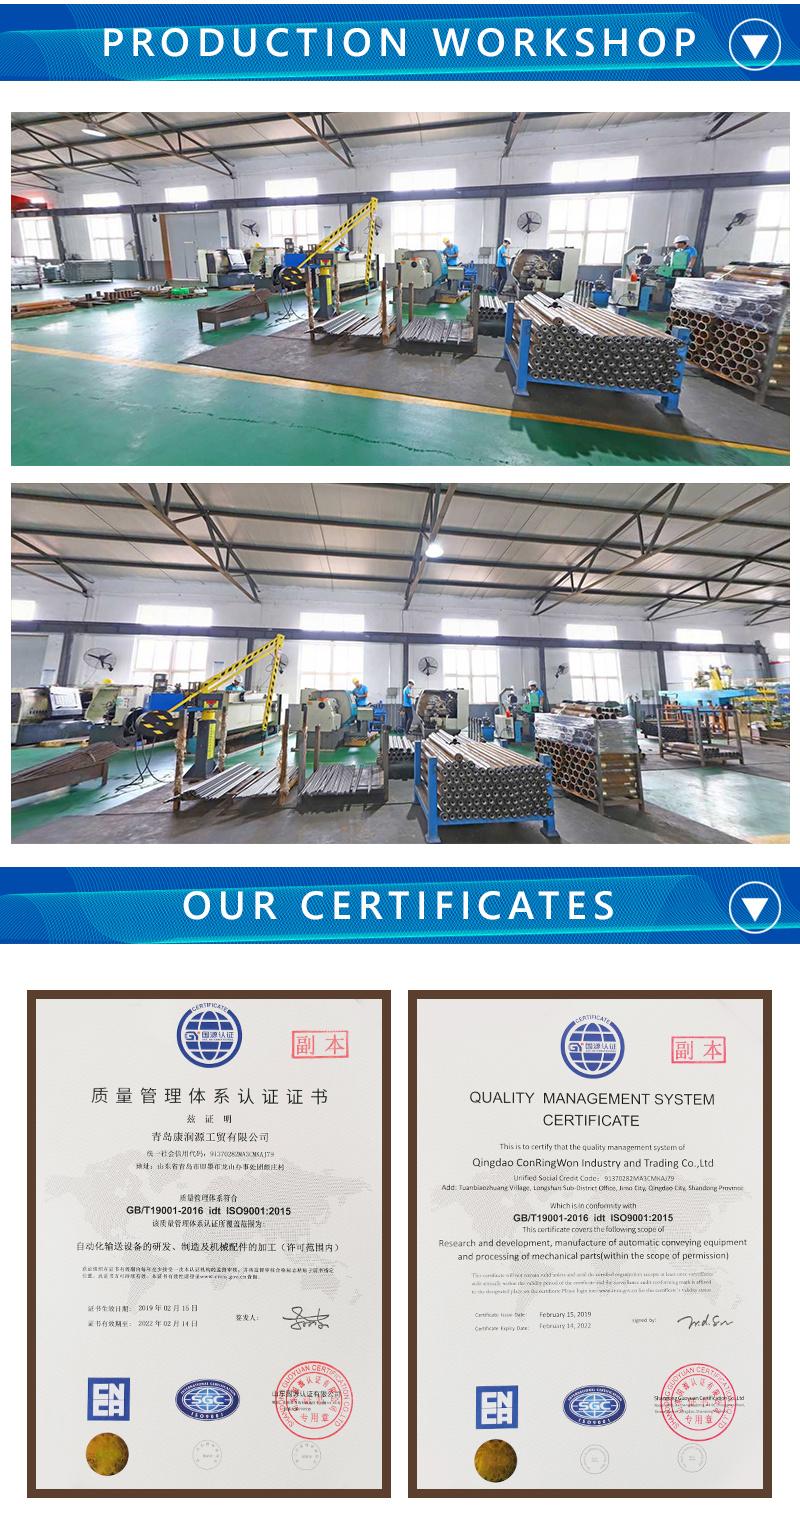 Stainless Steel Roller Conveying, Electric Roller Conveyor